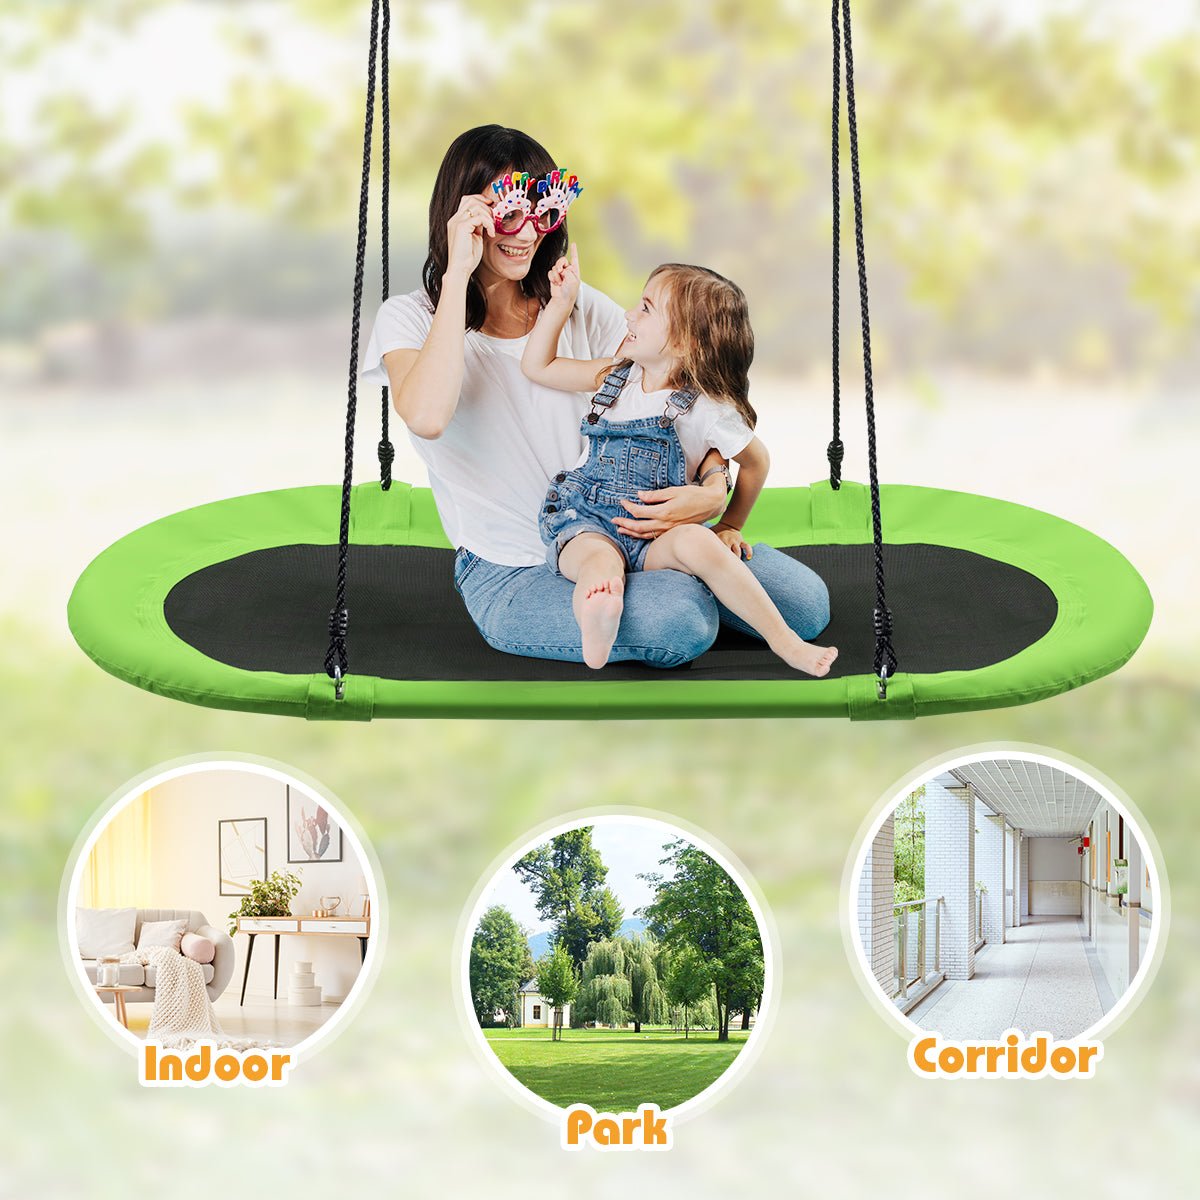 Outdoor Oval Swing Set: Fly with Adjustable Hanging Ropes for Kids